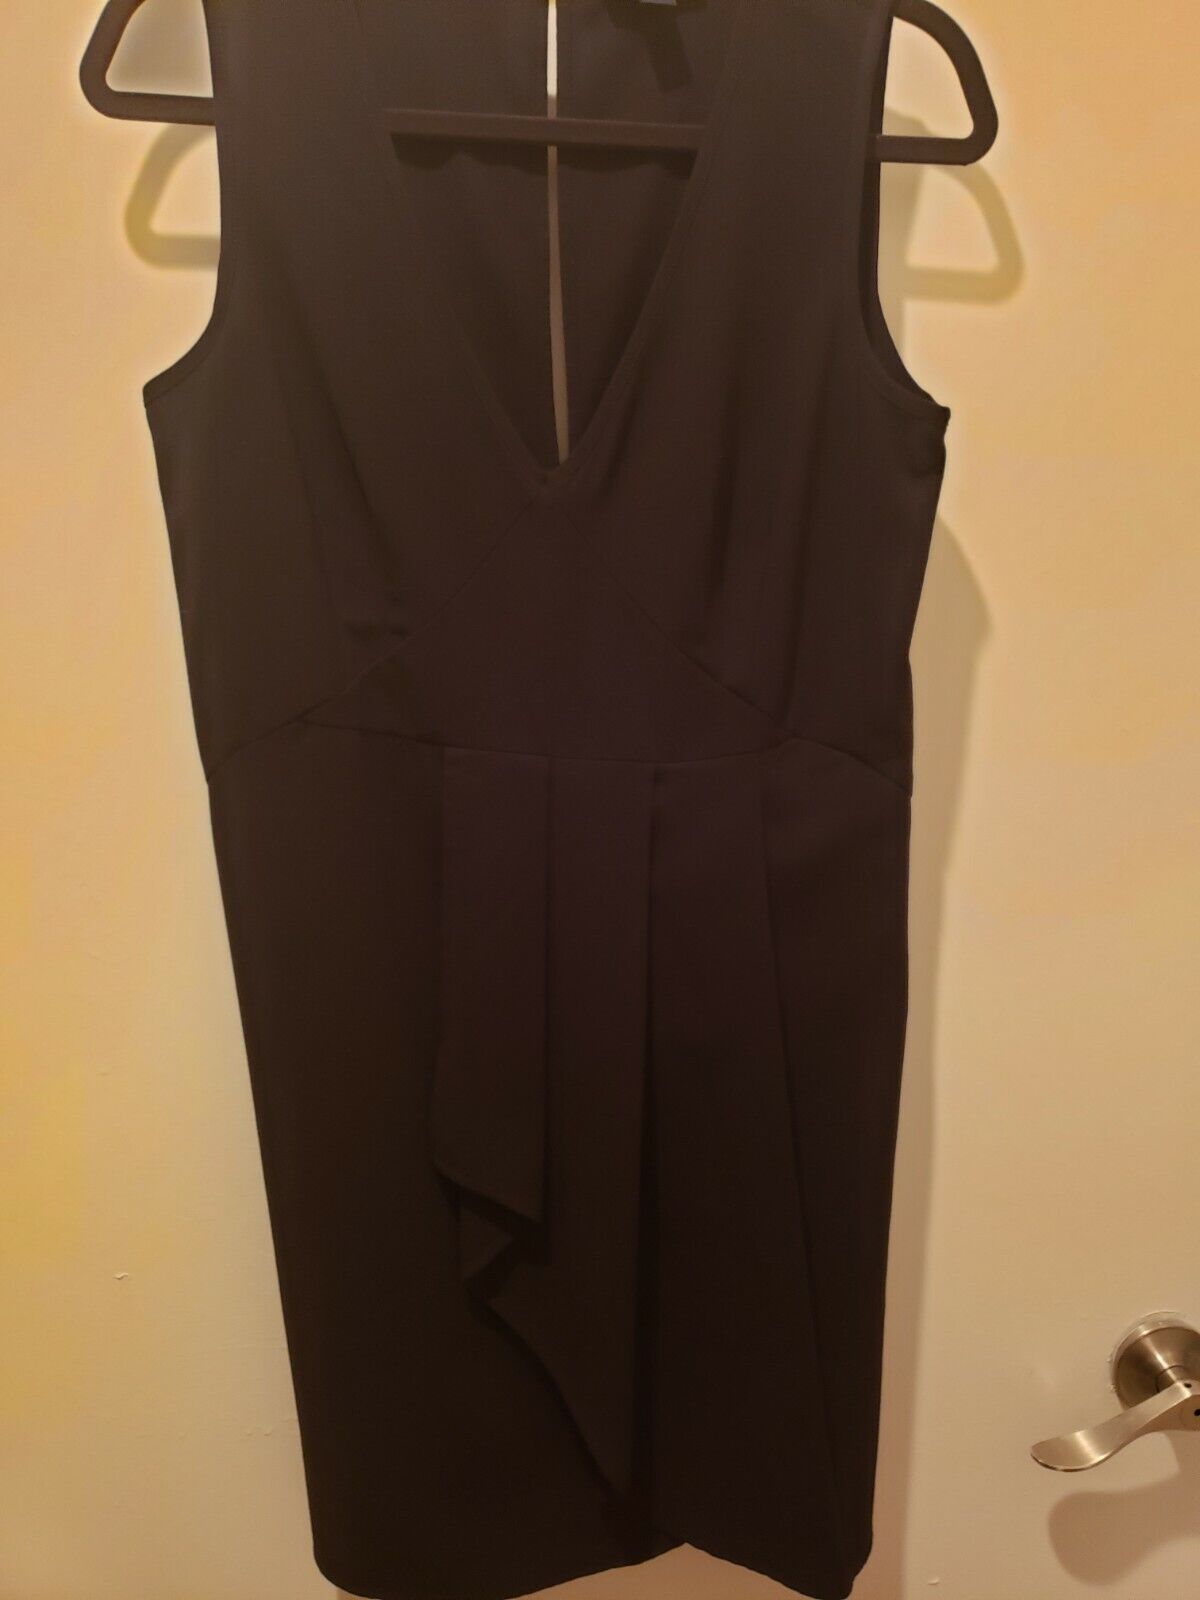 Gap Black Sleeveless Dress With Pleats And Semi Wrap Front Flap Button Close...